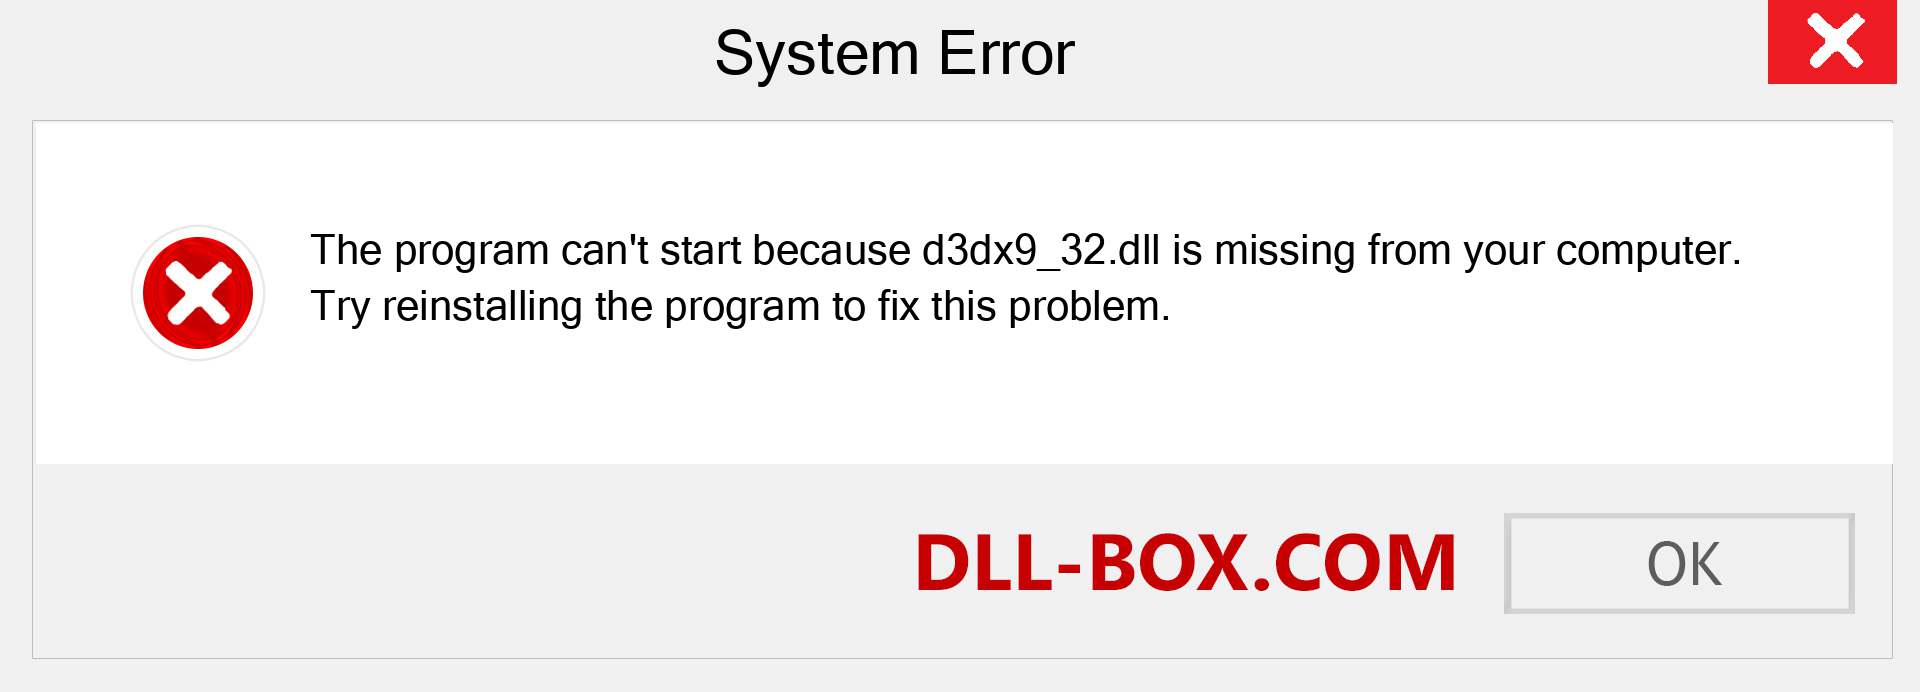  d3dx9_32.dll file is missing?. Download for Windows 7, 8, 10 - Fix  d3dx9_32 dll Missing Error on Windows, photos, images